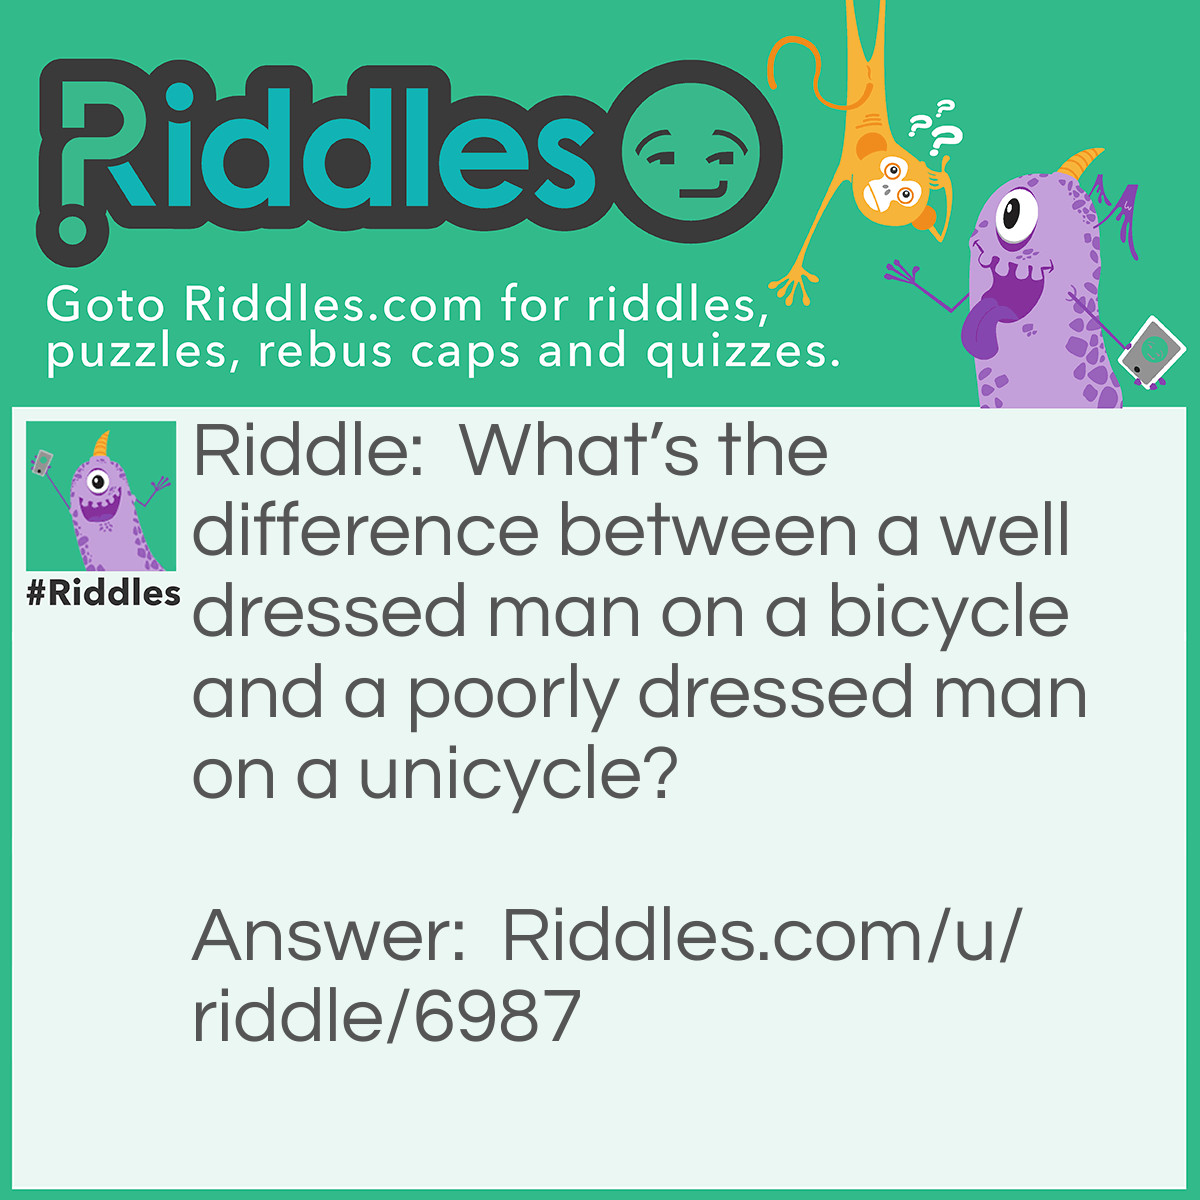 Riddle: What's the difference between a well dressed man on a bicycle and a poorly dressed man on a unicycle? Answer: Attire (a tire).